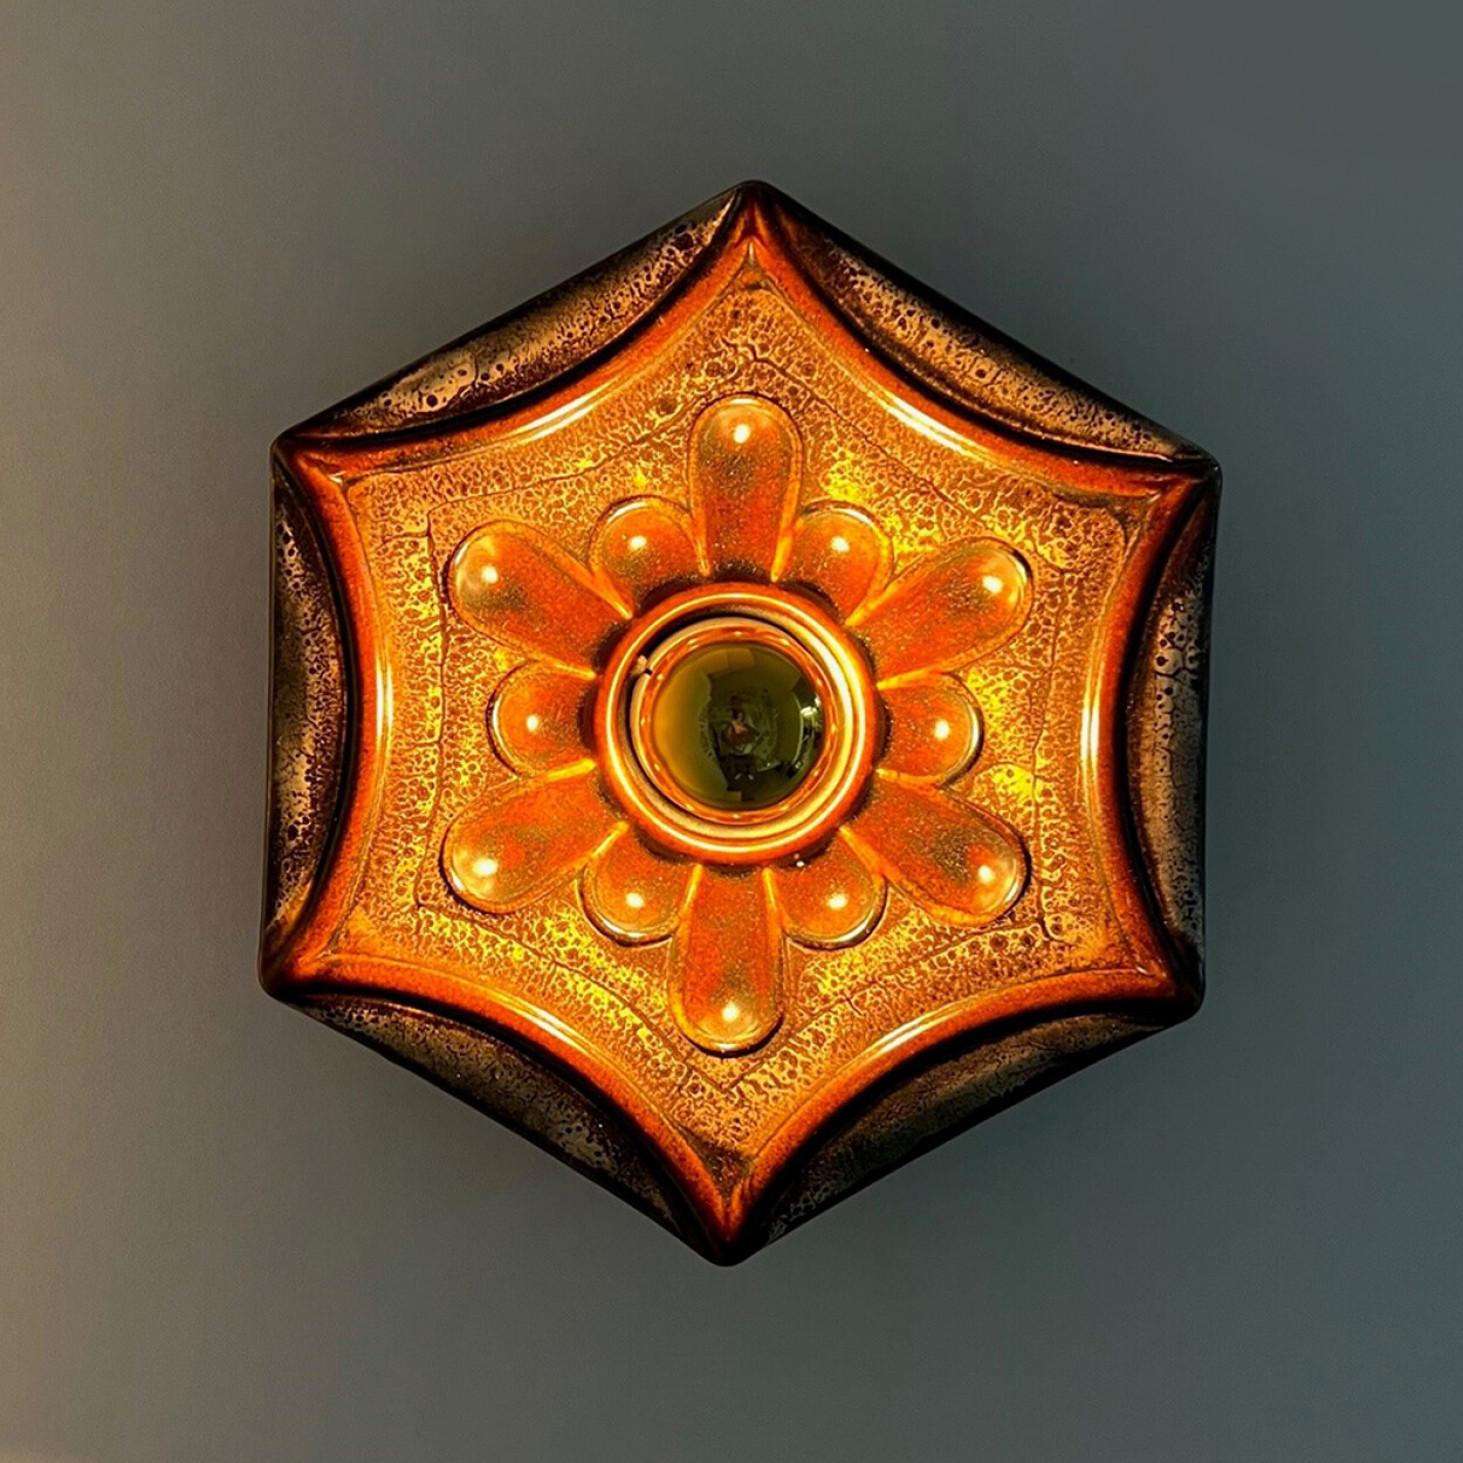 Hex-shaped Star Ceramic Wall Lights, Germany, 1970 For Sale 4